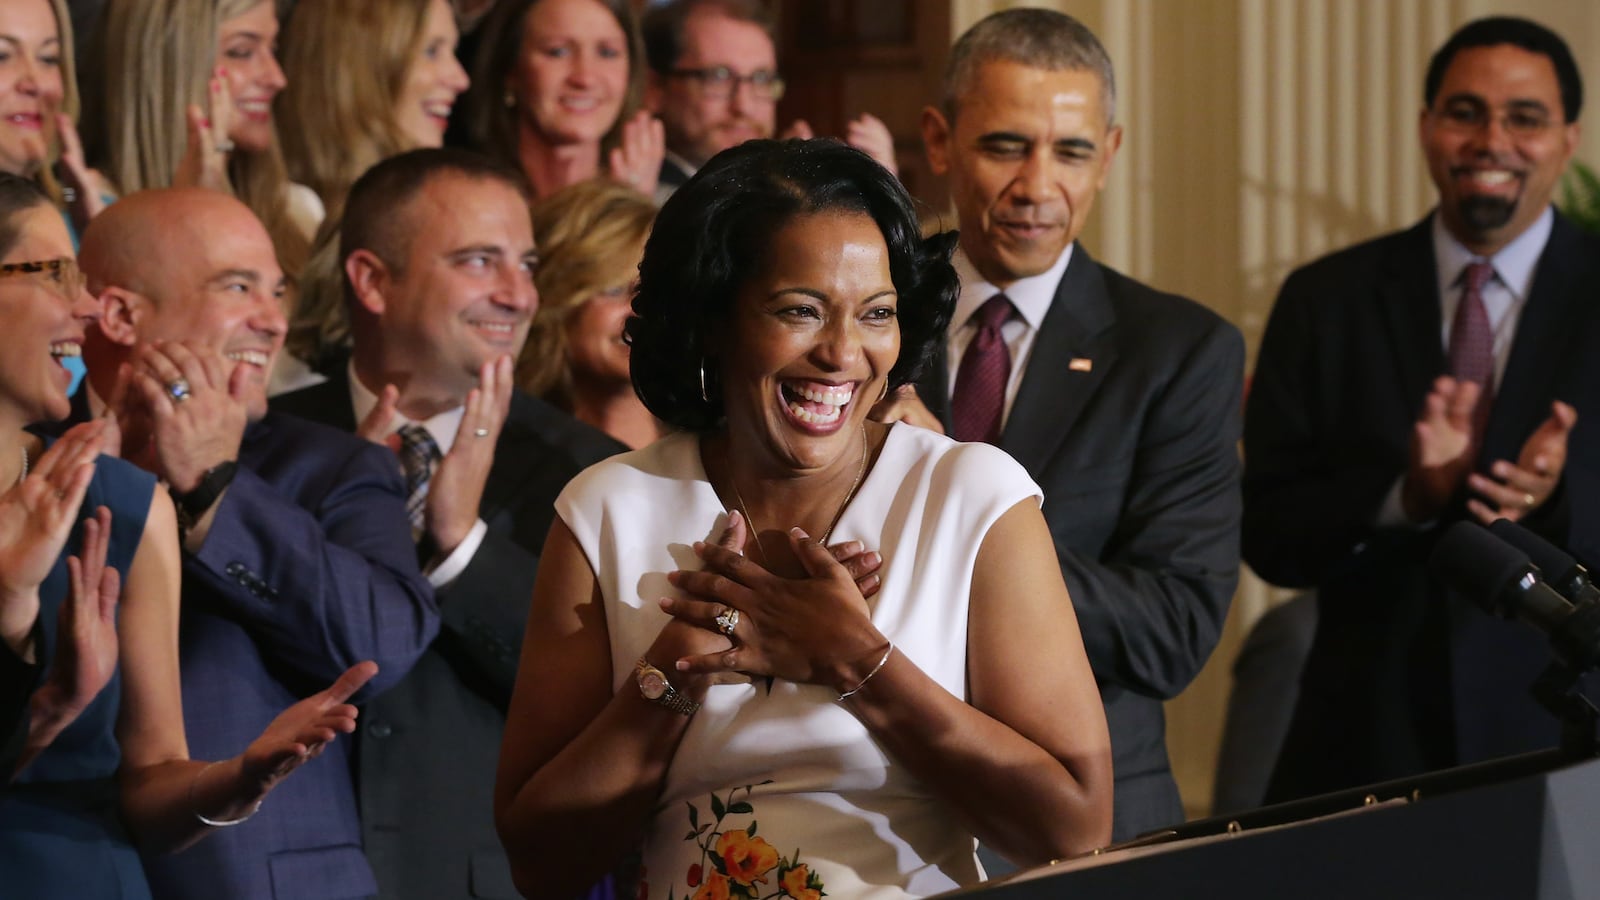 2016 National Teacher of the Year Jahana Hayes  after taking the stage with U.S. President Barack Obama, Education Secretary John King, and her fellow state teachers of the year during a ceremony in the White House in 2016.